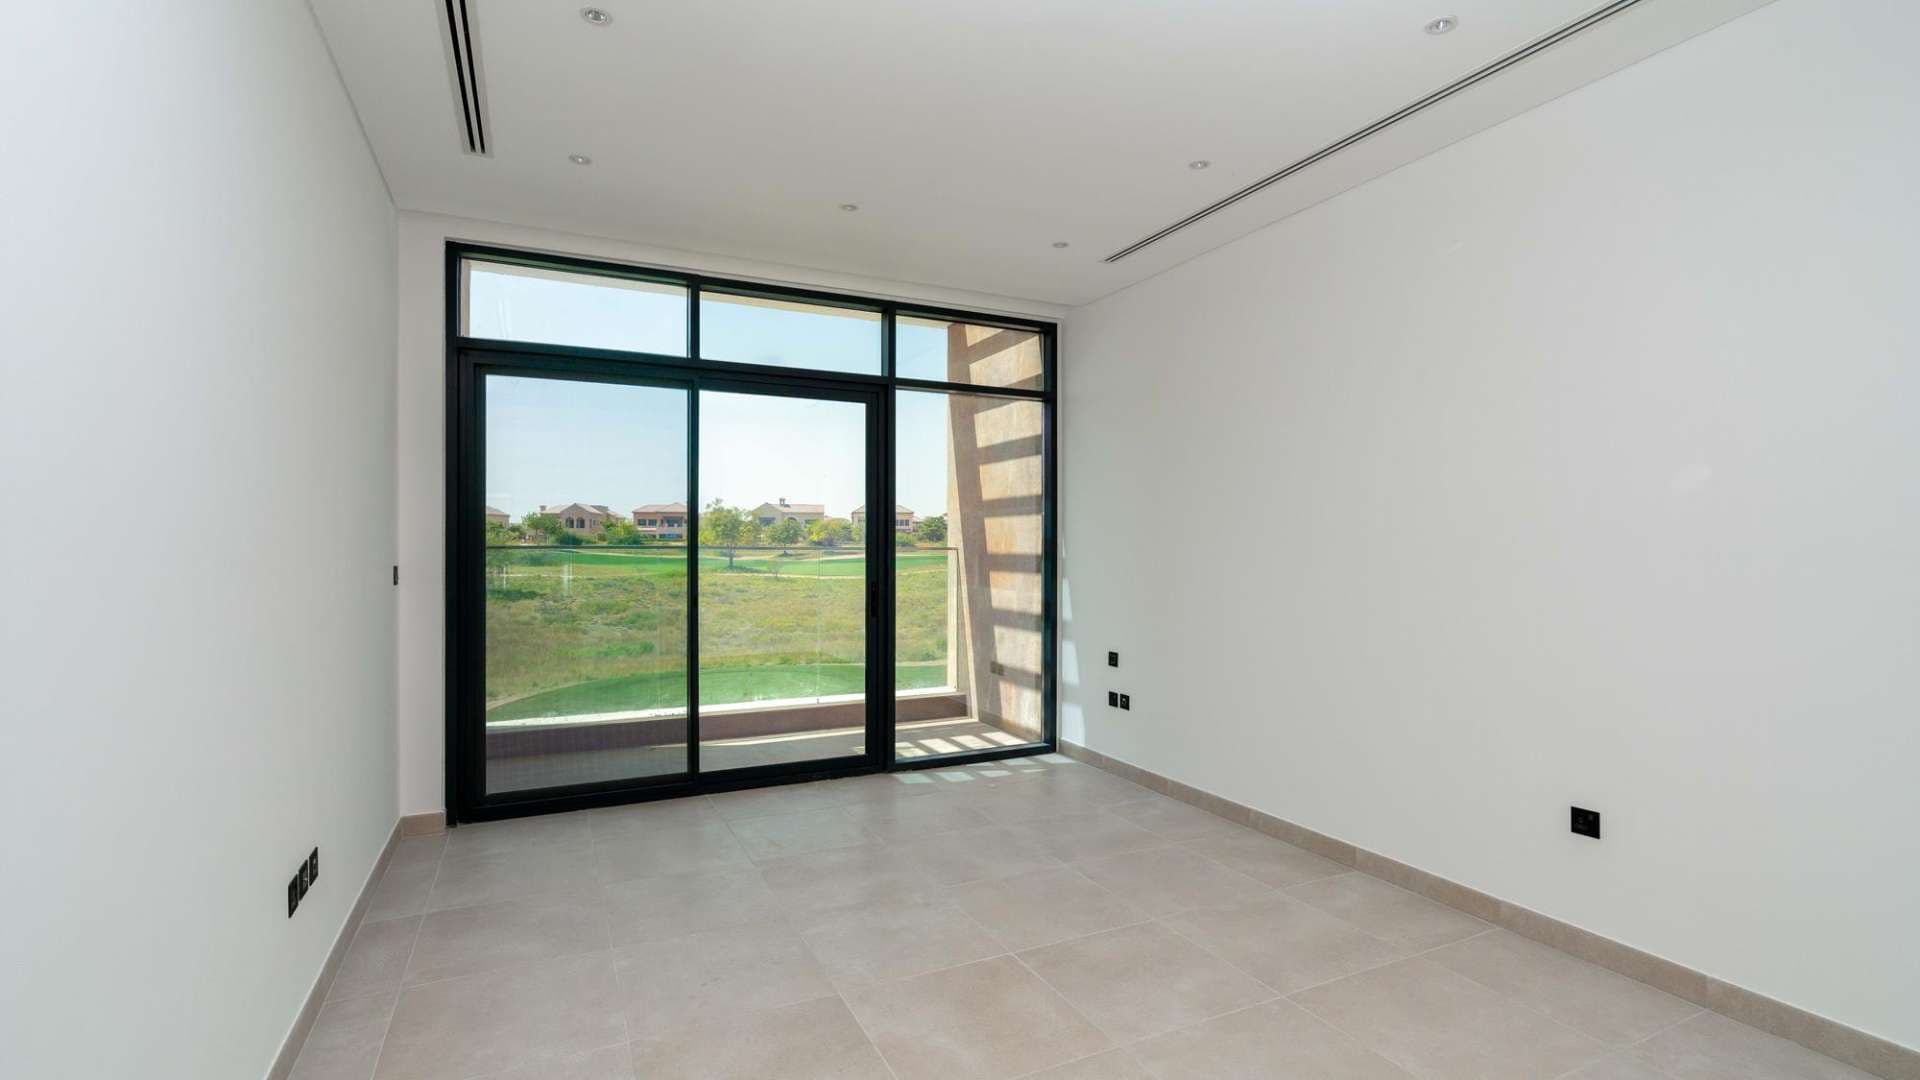 3 Bedroom Townhouse For Sale Jumeirah Luxury Living Lp03859 30d7603a2560f80.jpg